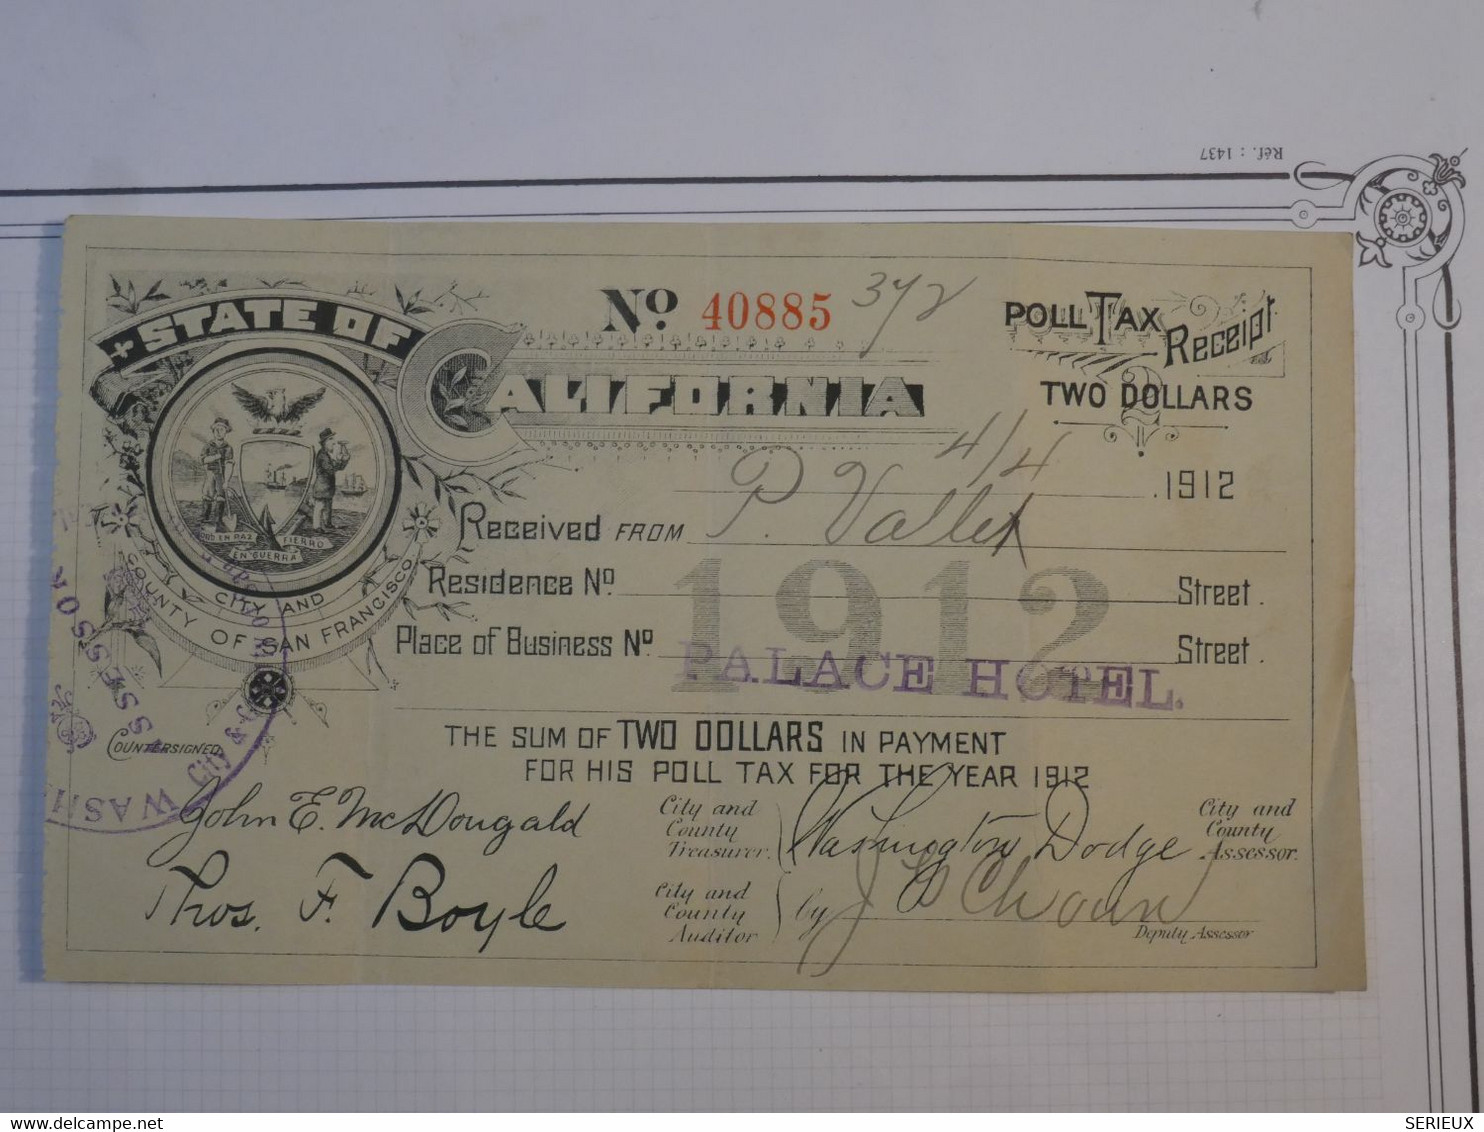 Unidentified - USA 1000 DOLLARS SPECIMEN THOMAS COOK TRAVELERS CHEQUE  1978-1979 free shipping via registered air mail